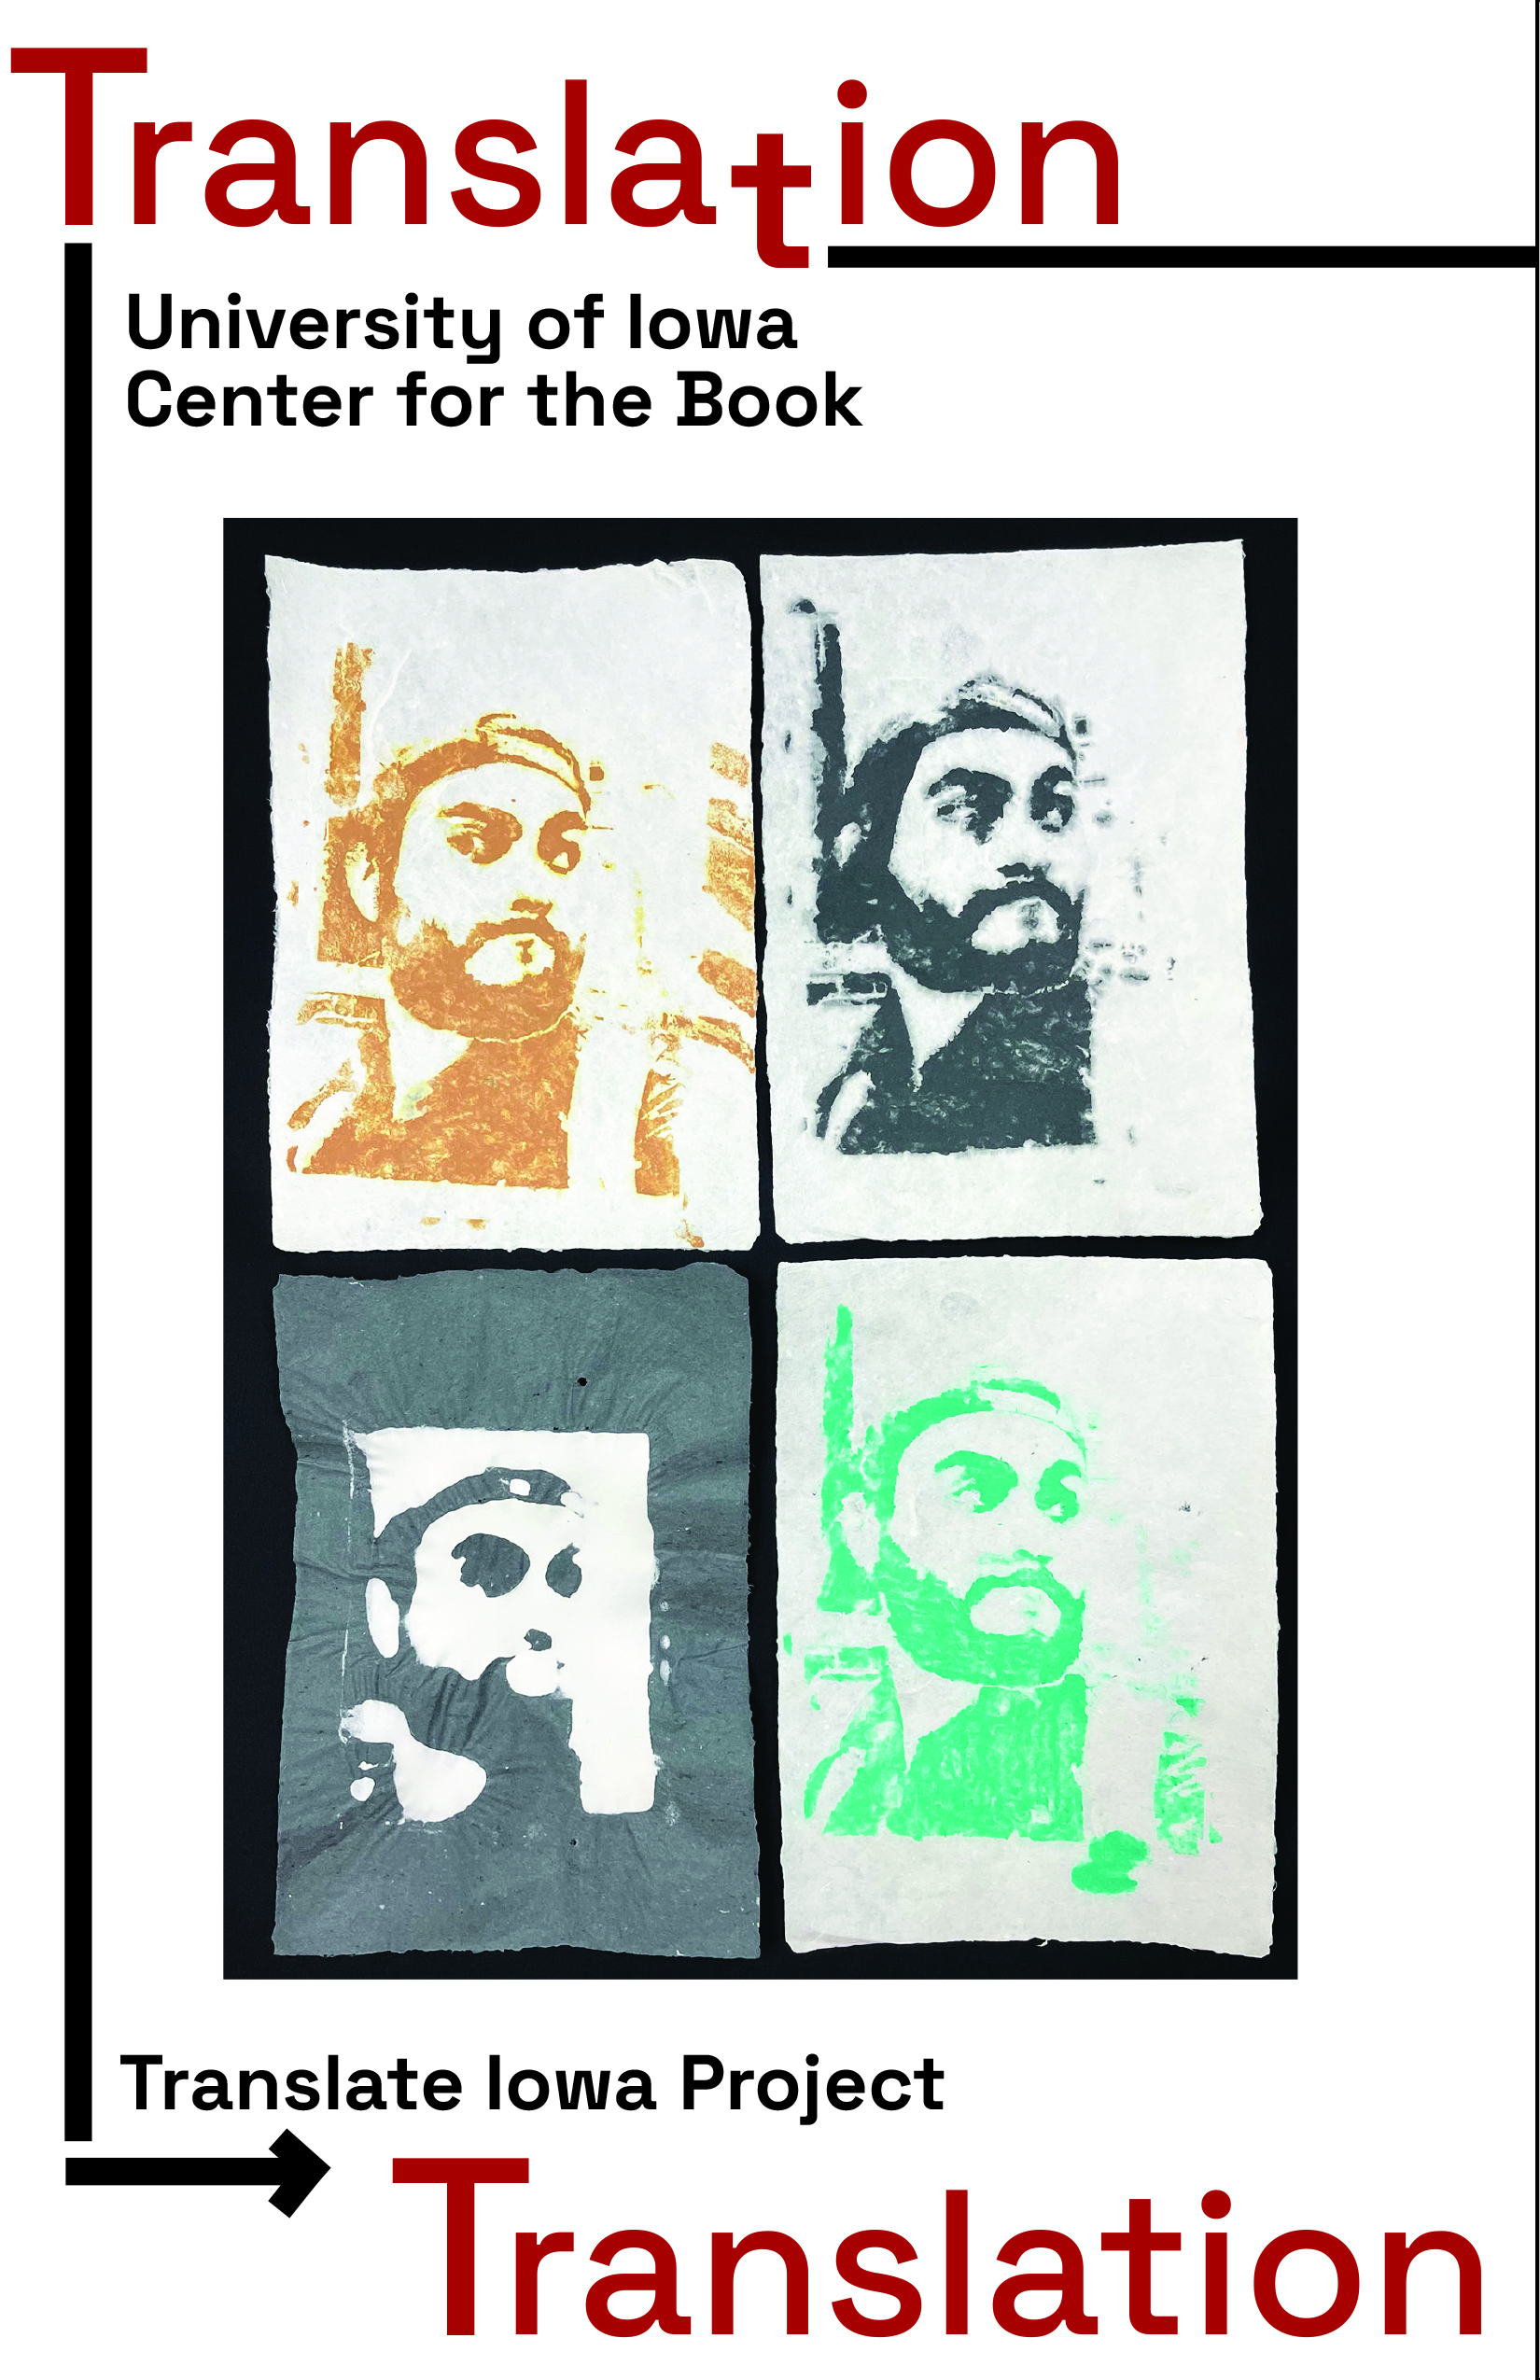 riso printed poster with four images of the same person with a beard printing in various colors.